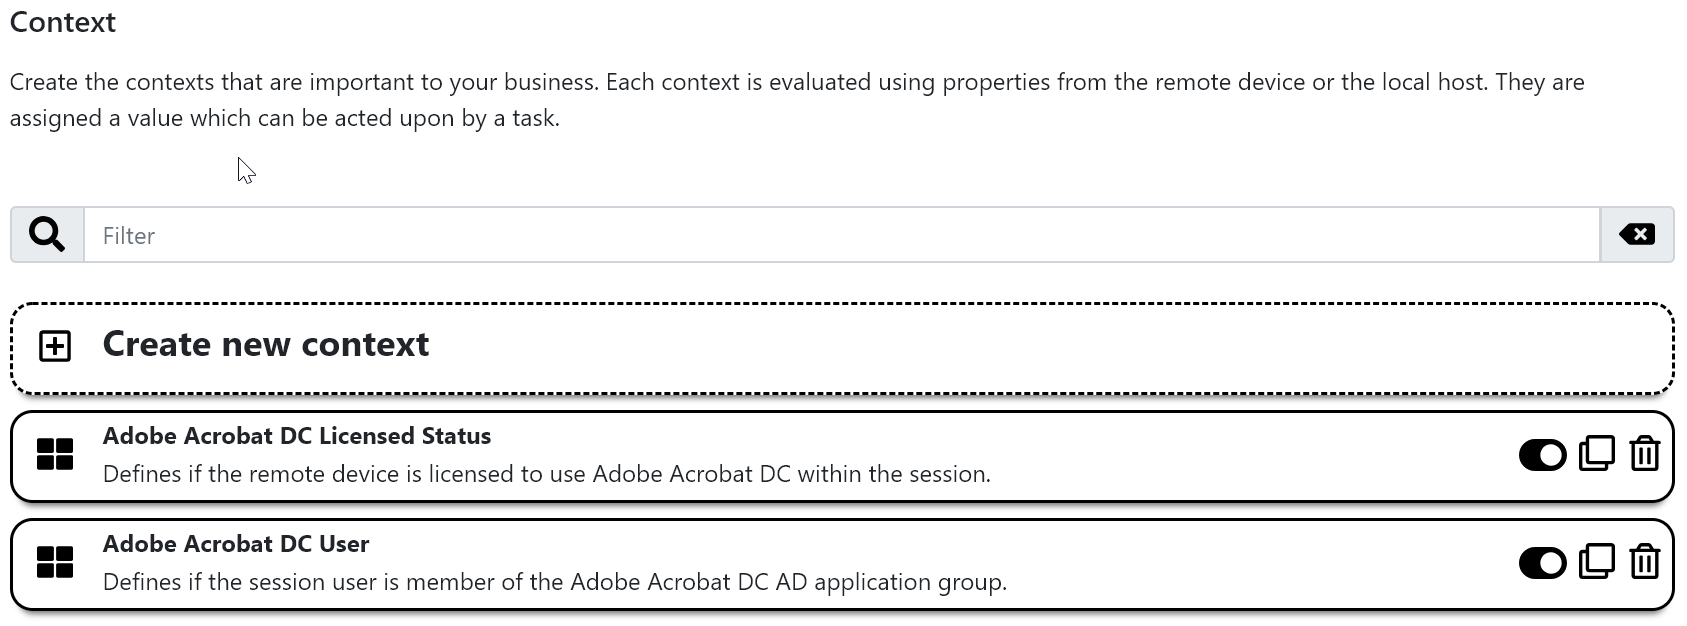 The contexts within the Acrobat DC template